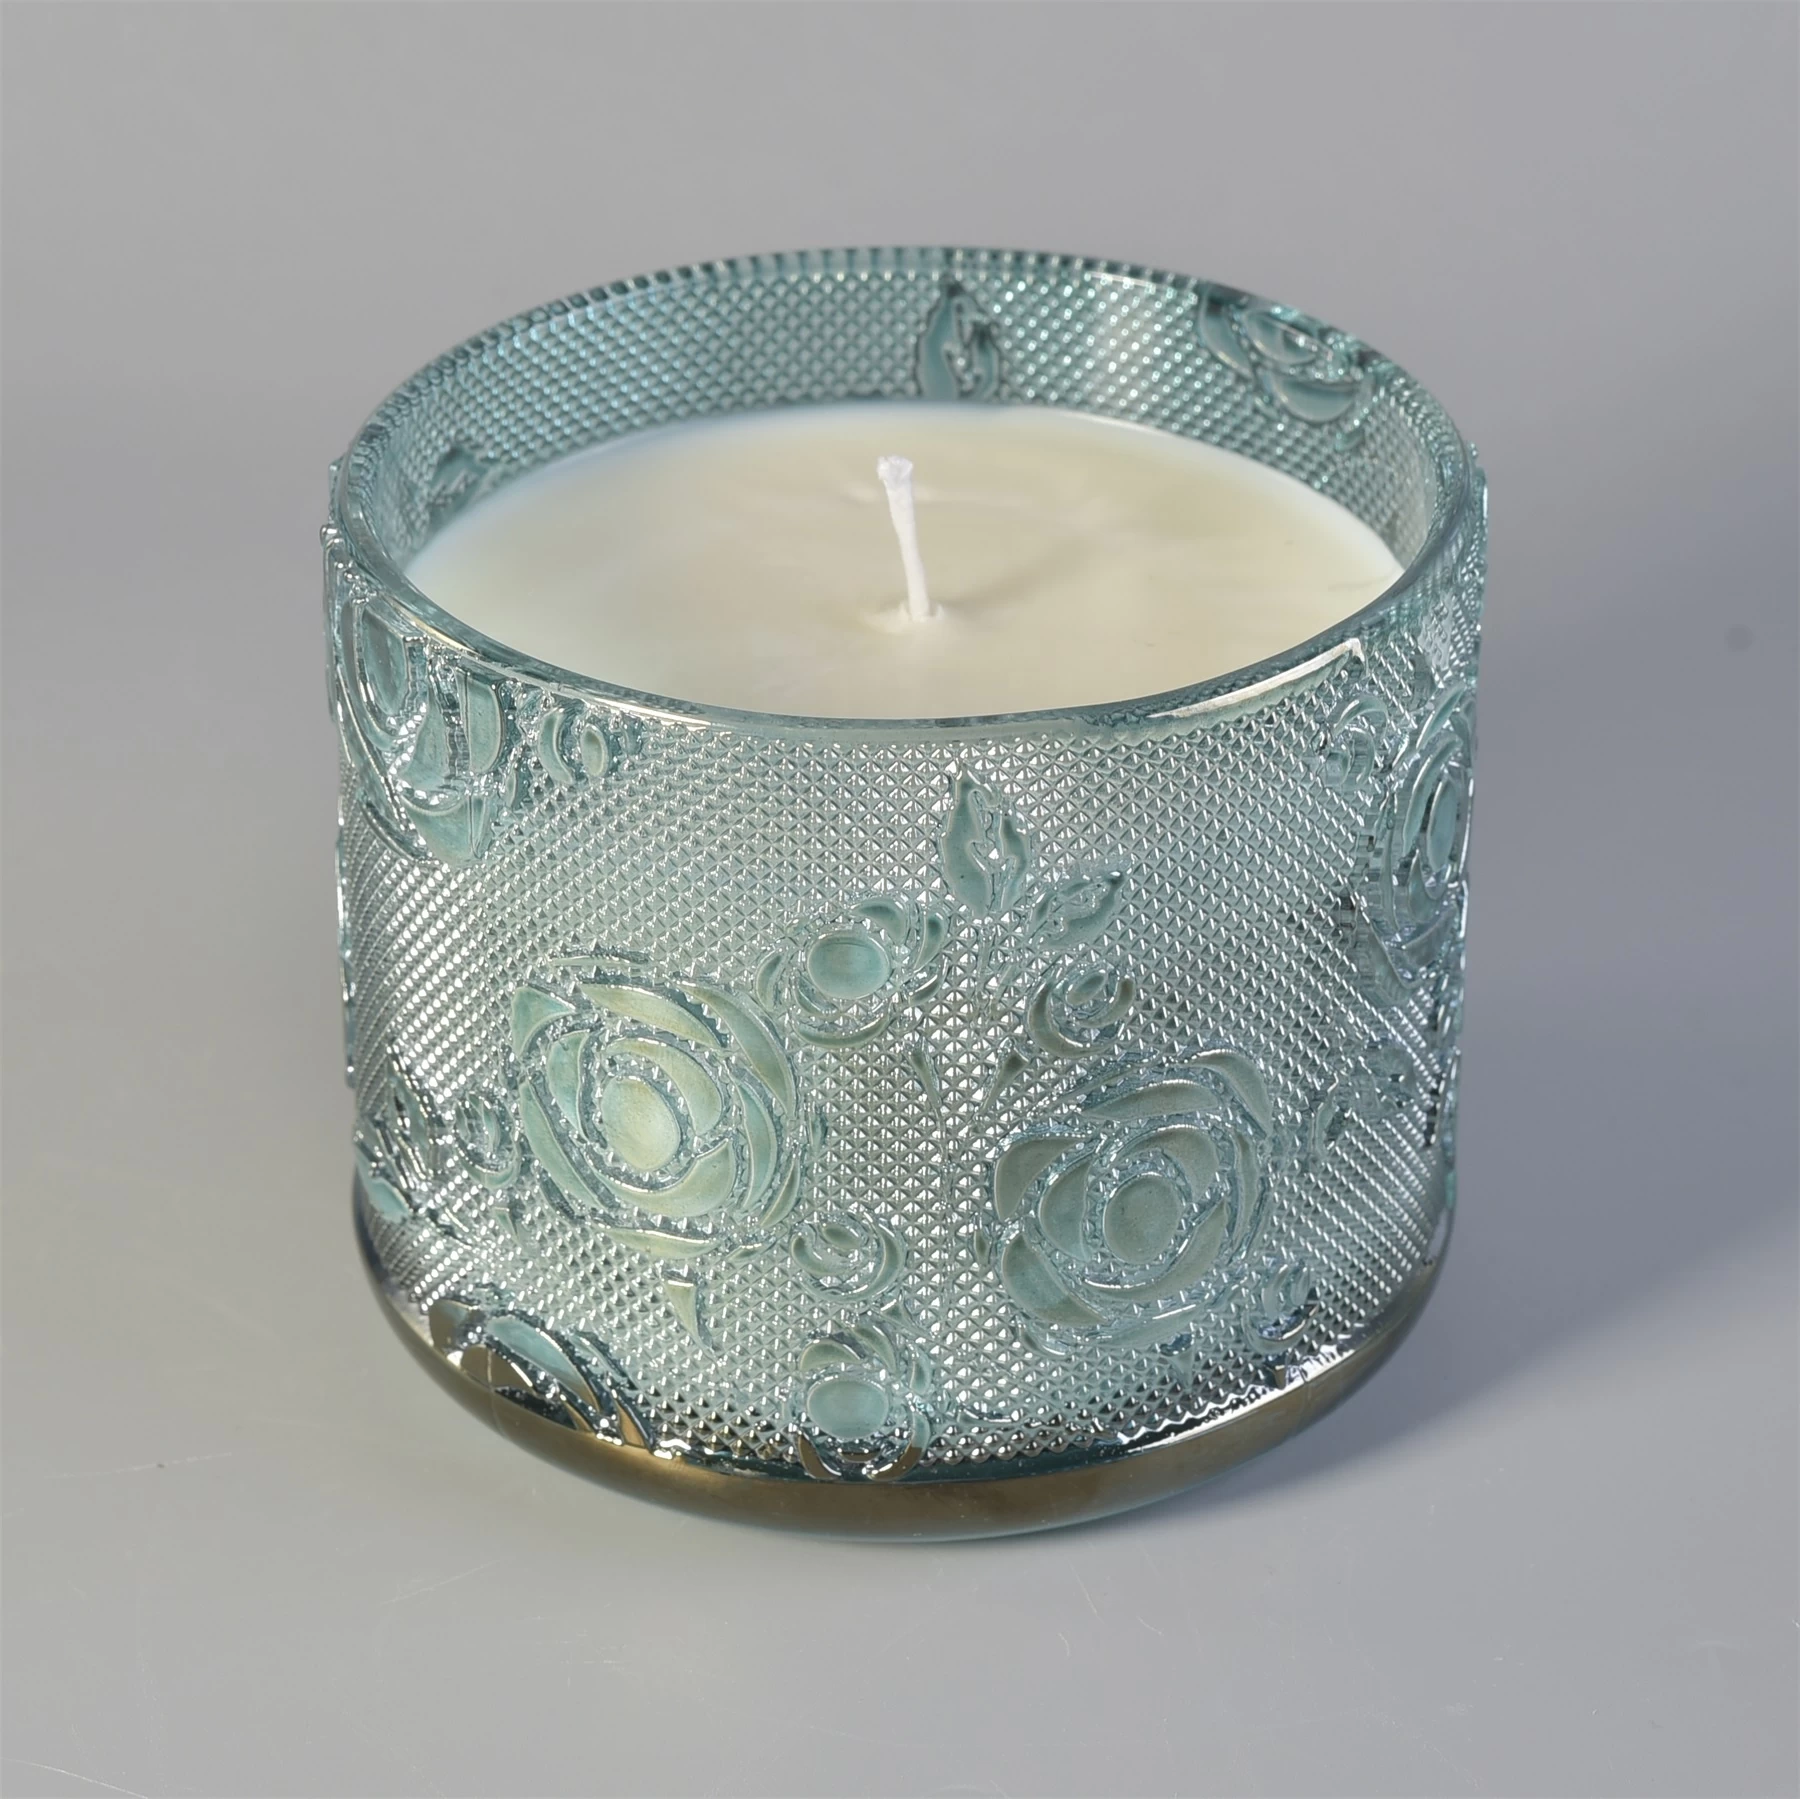 Home decoration rose luxury votive glass candle holders